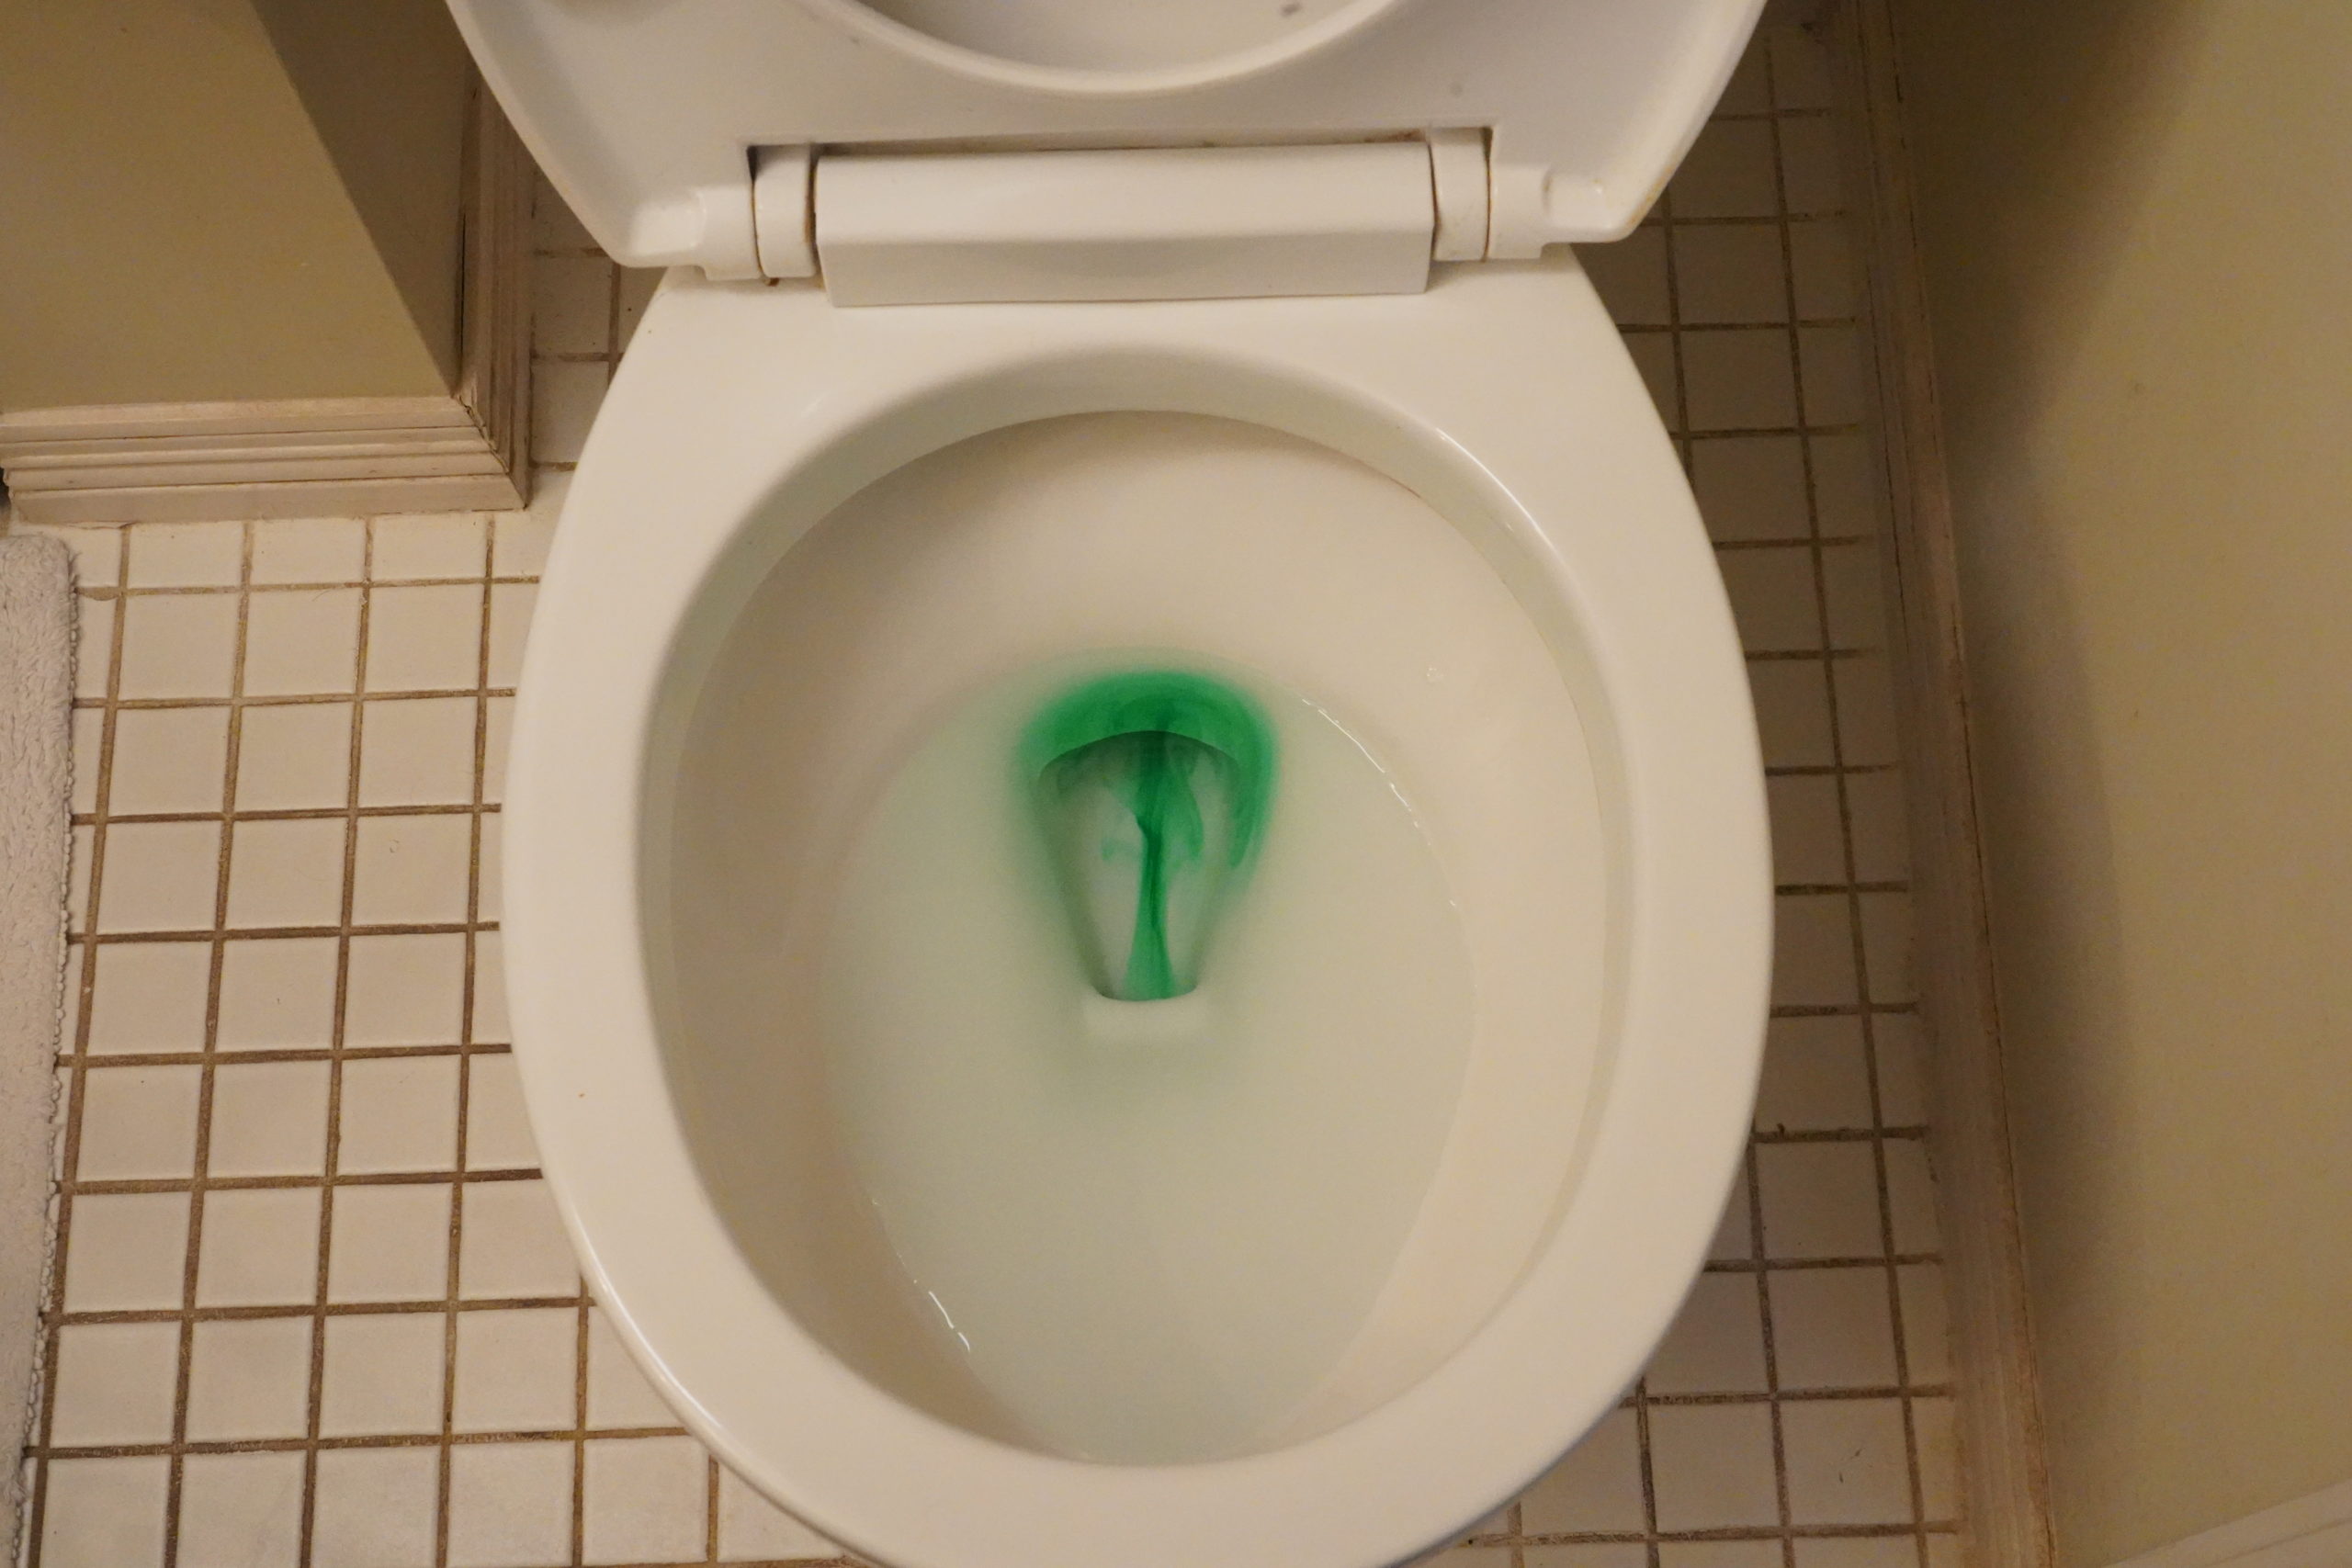 Placing a few drops of food coloring in a toilet's tank will leak into the bowl if there is a leak in the flapper. Photo credit: Denver Water.